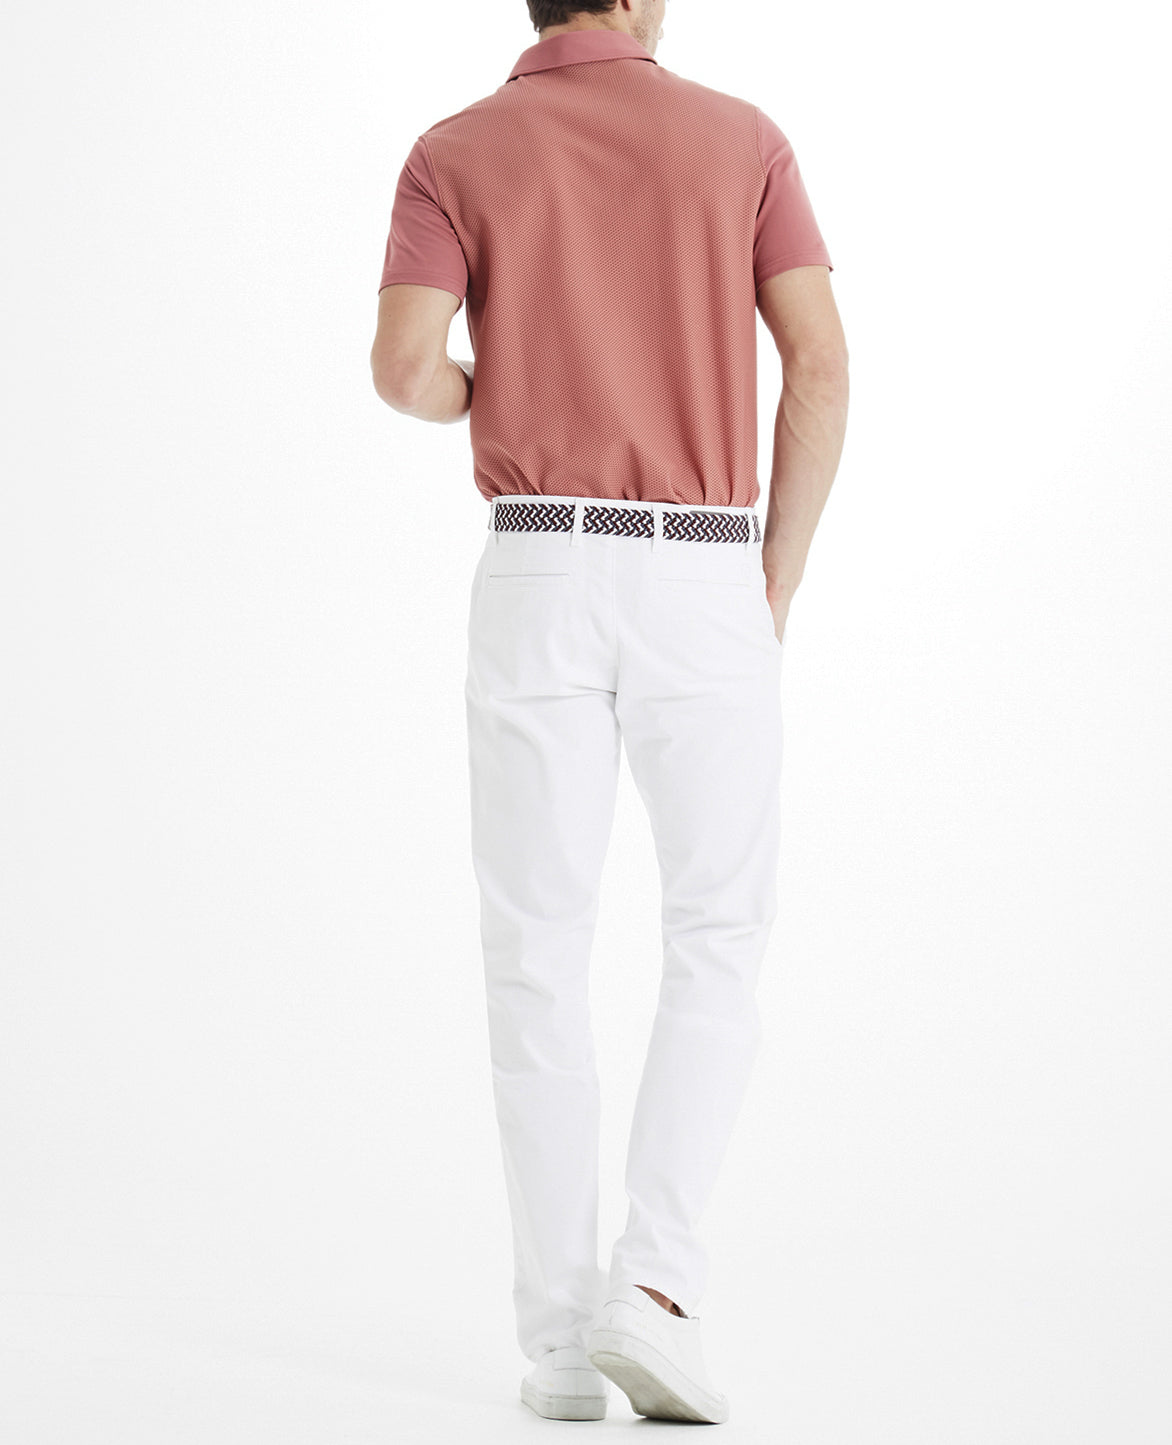 Andrew Trouser Bright White Green Label Collection Men Bottoms Photo 3